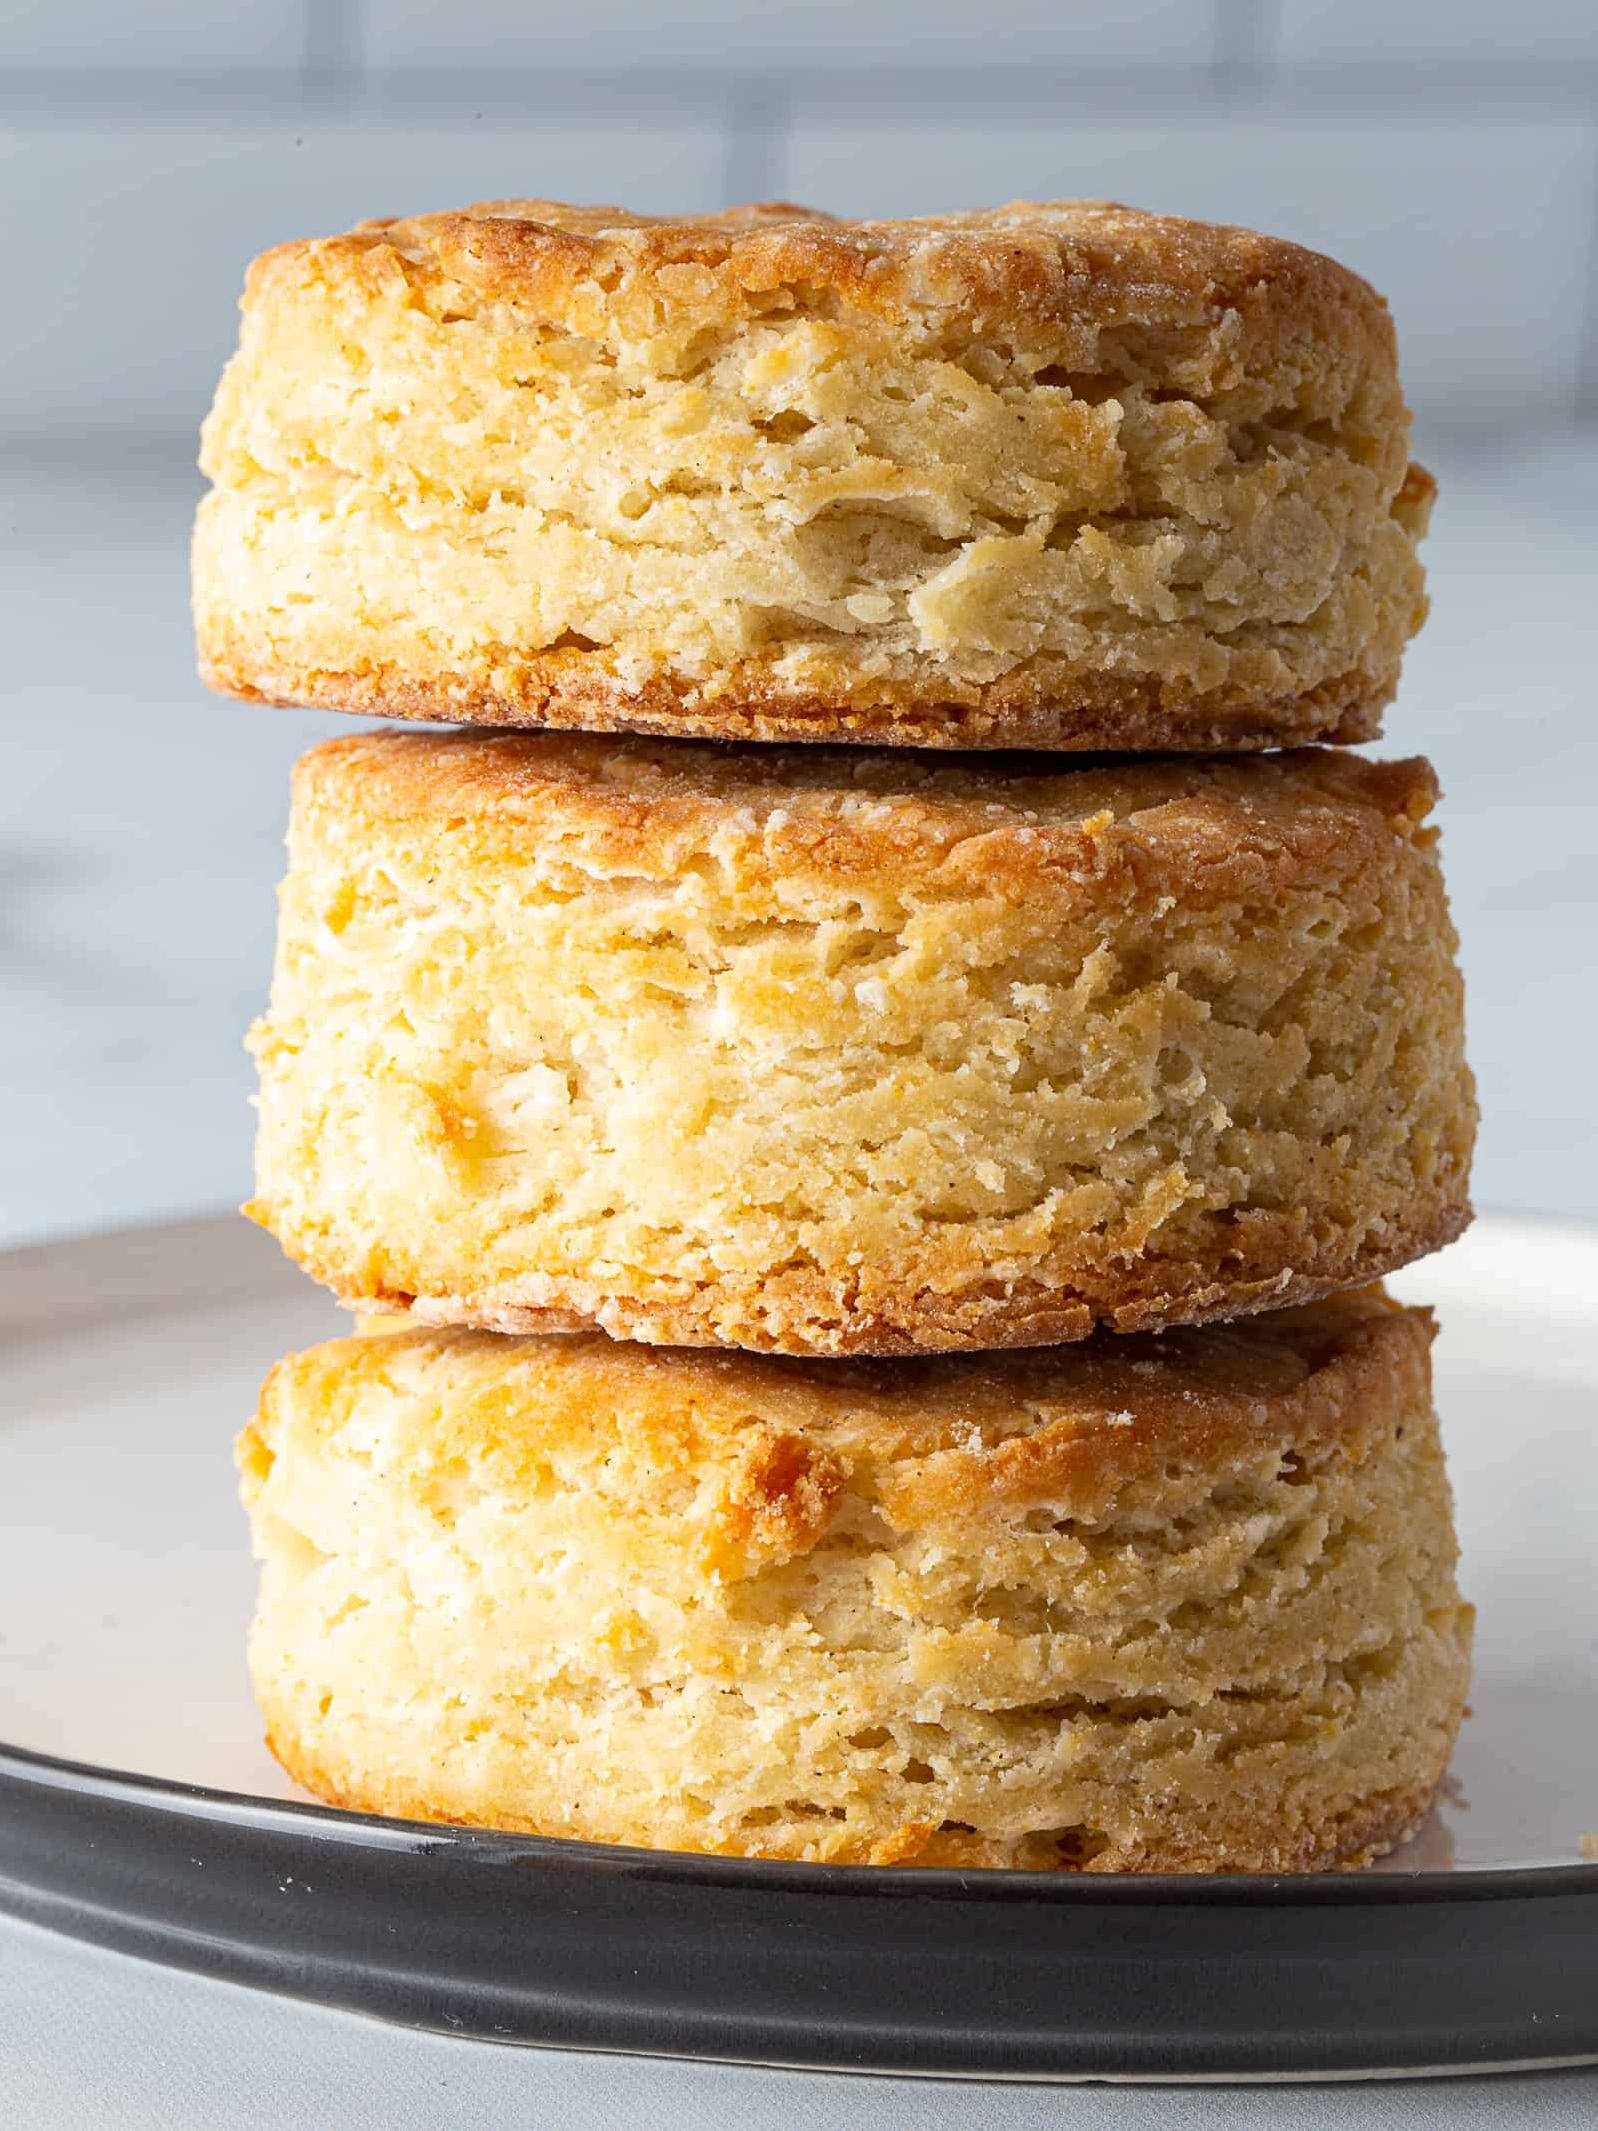  Treat yourself to these homemade gluten-free biscuits – you deserve it!